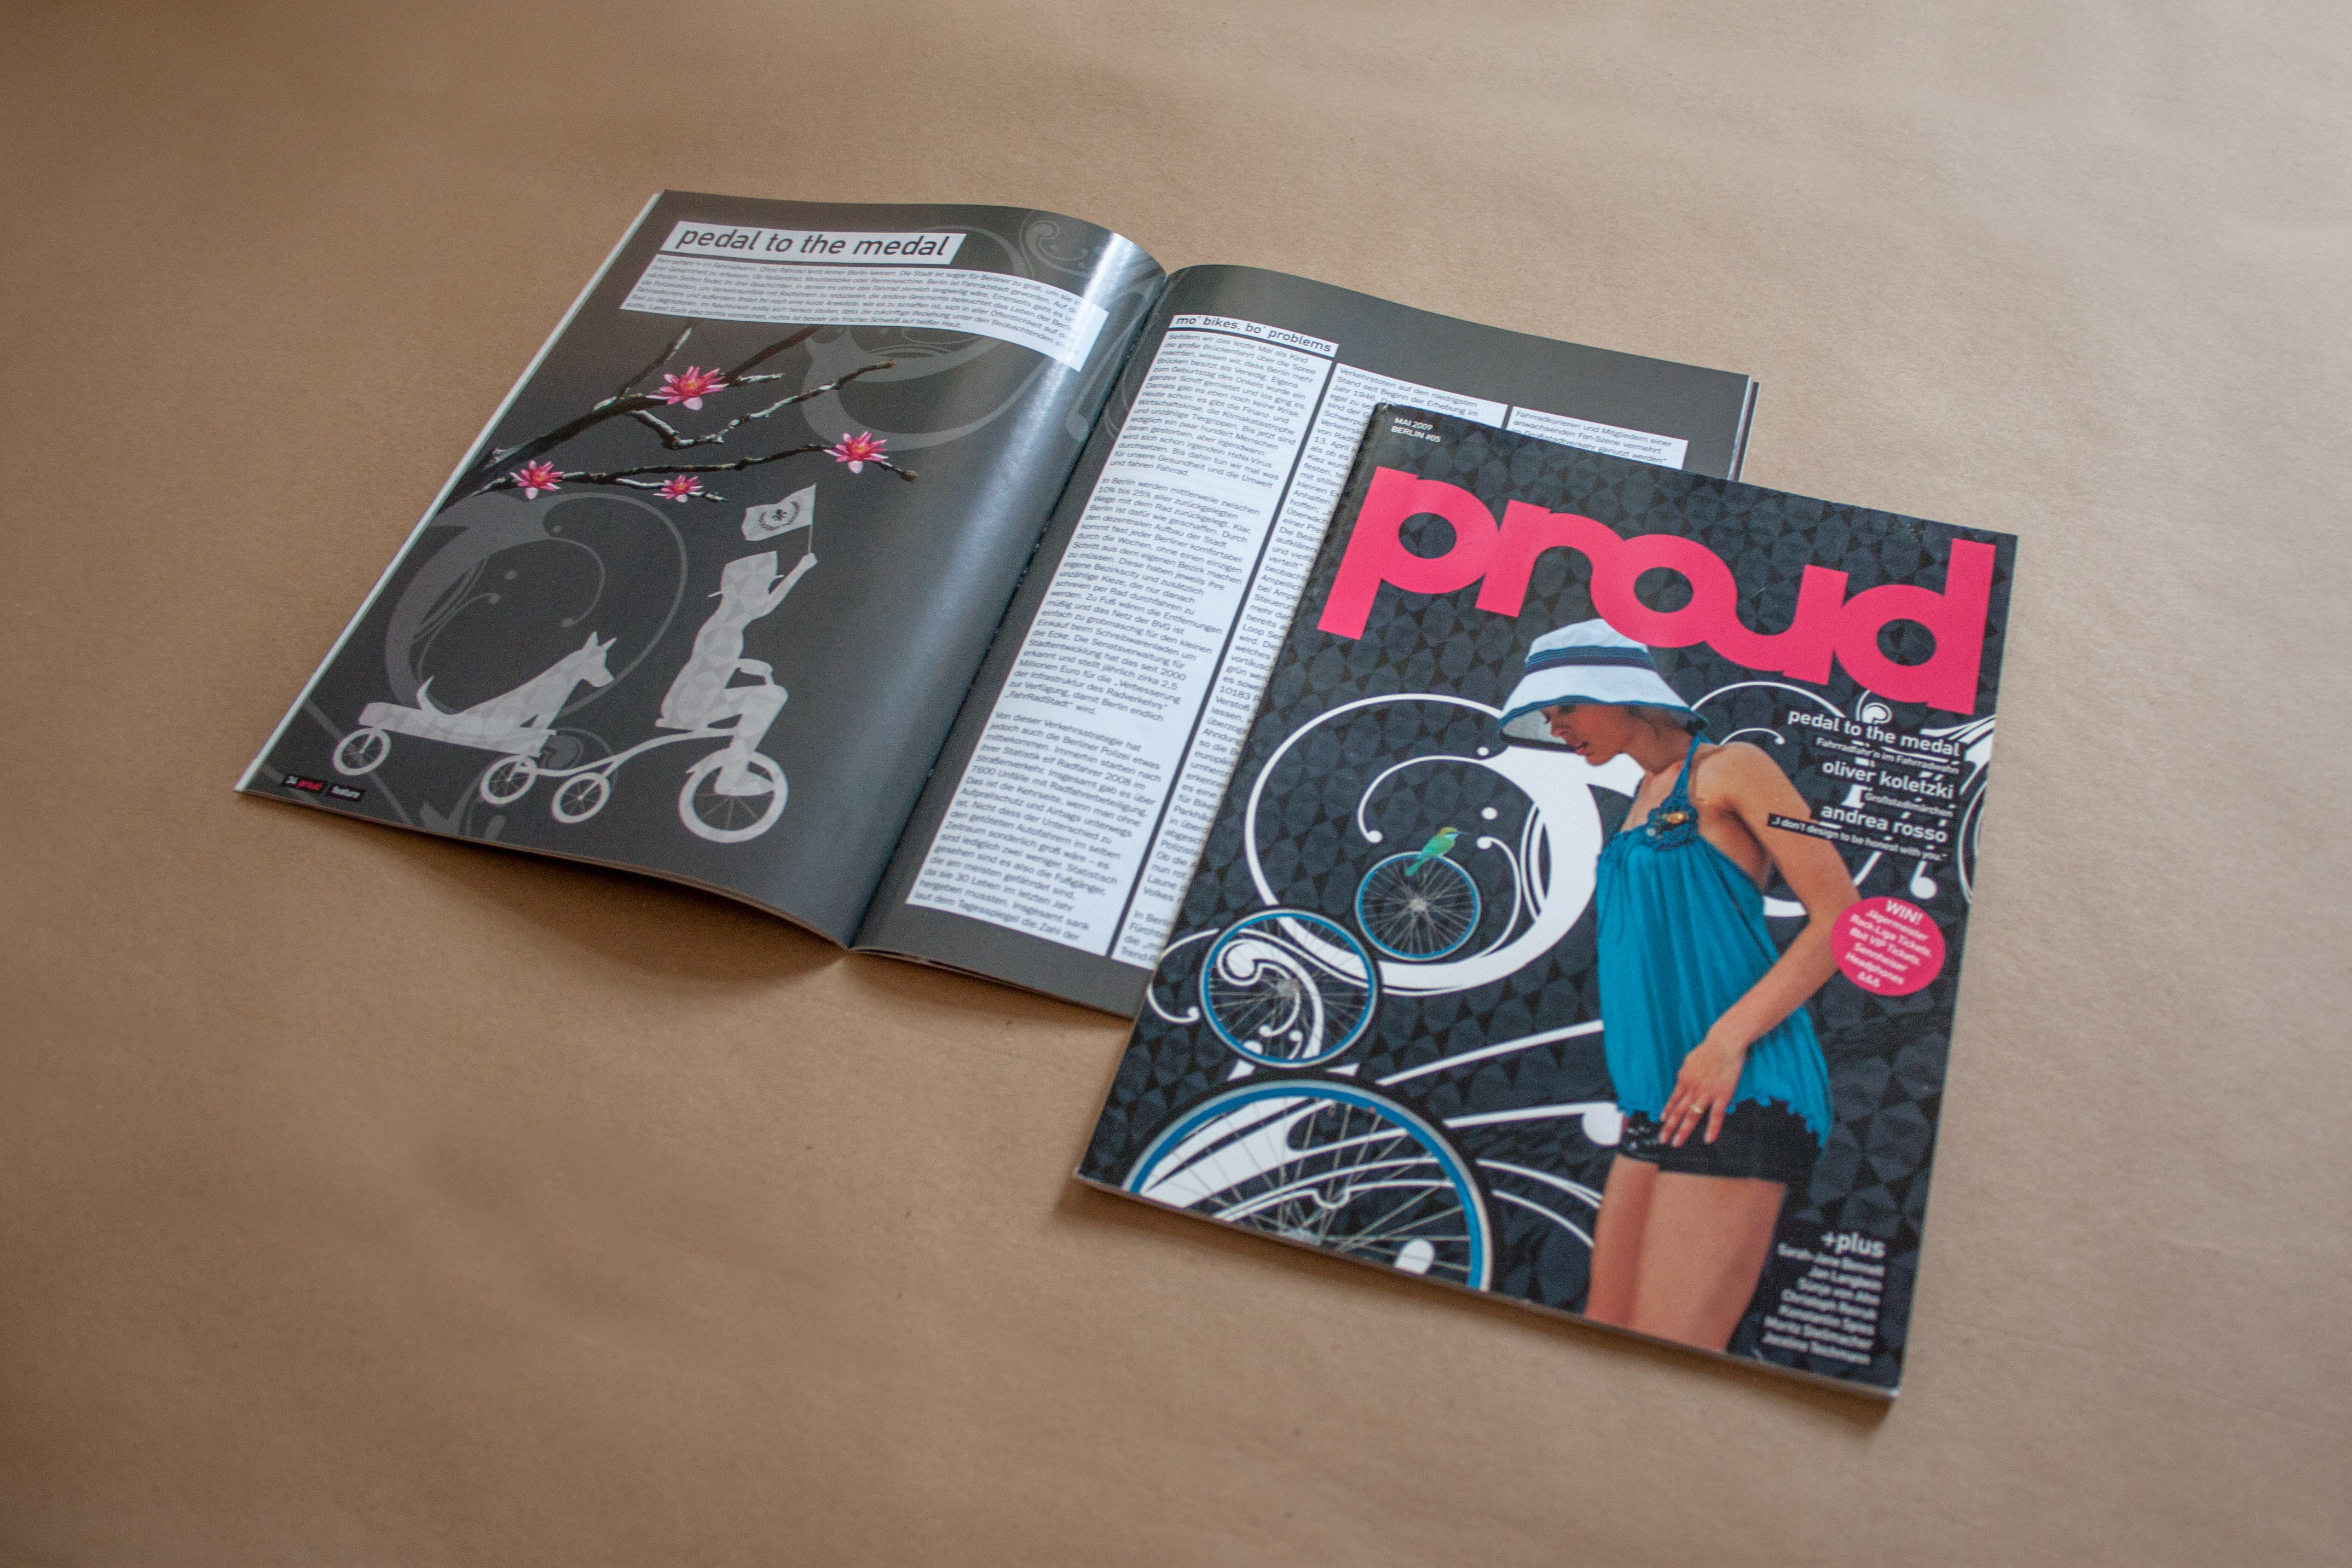 Proud magazine cover and inside pages